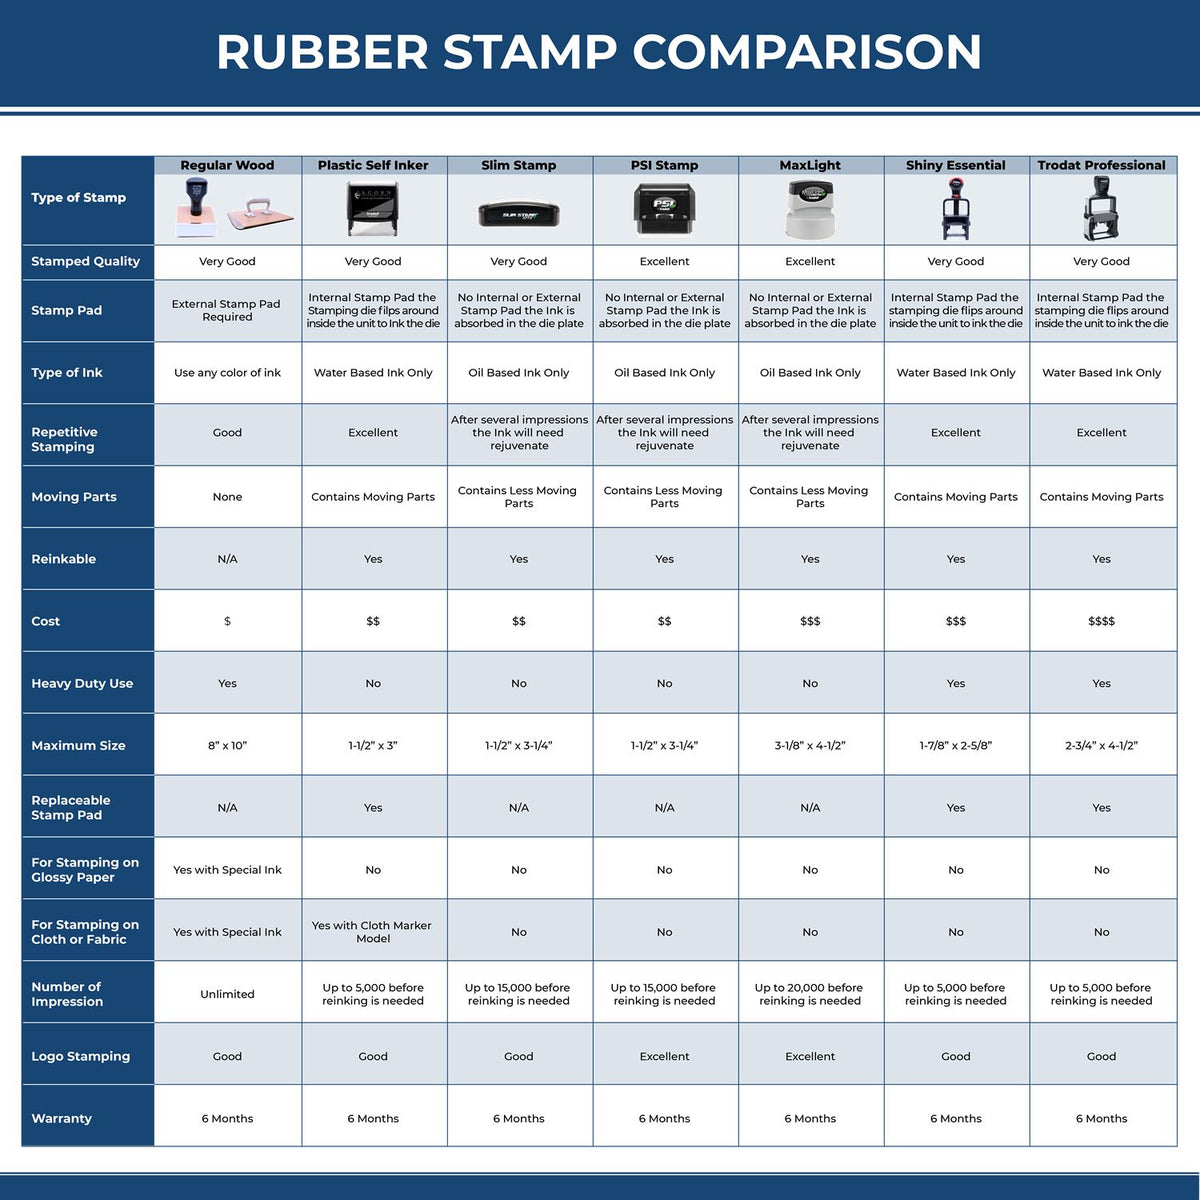 A comparison chart for the different types of mount models available for the PSI Arizona Notary Stamp.